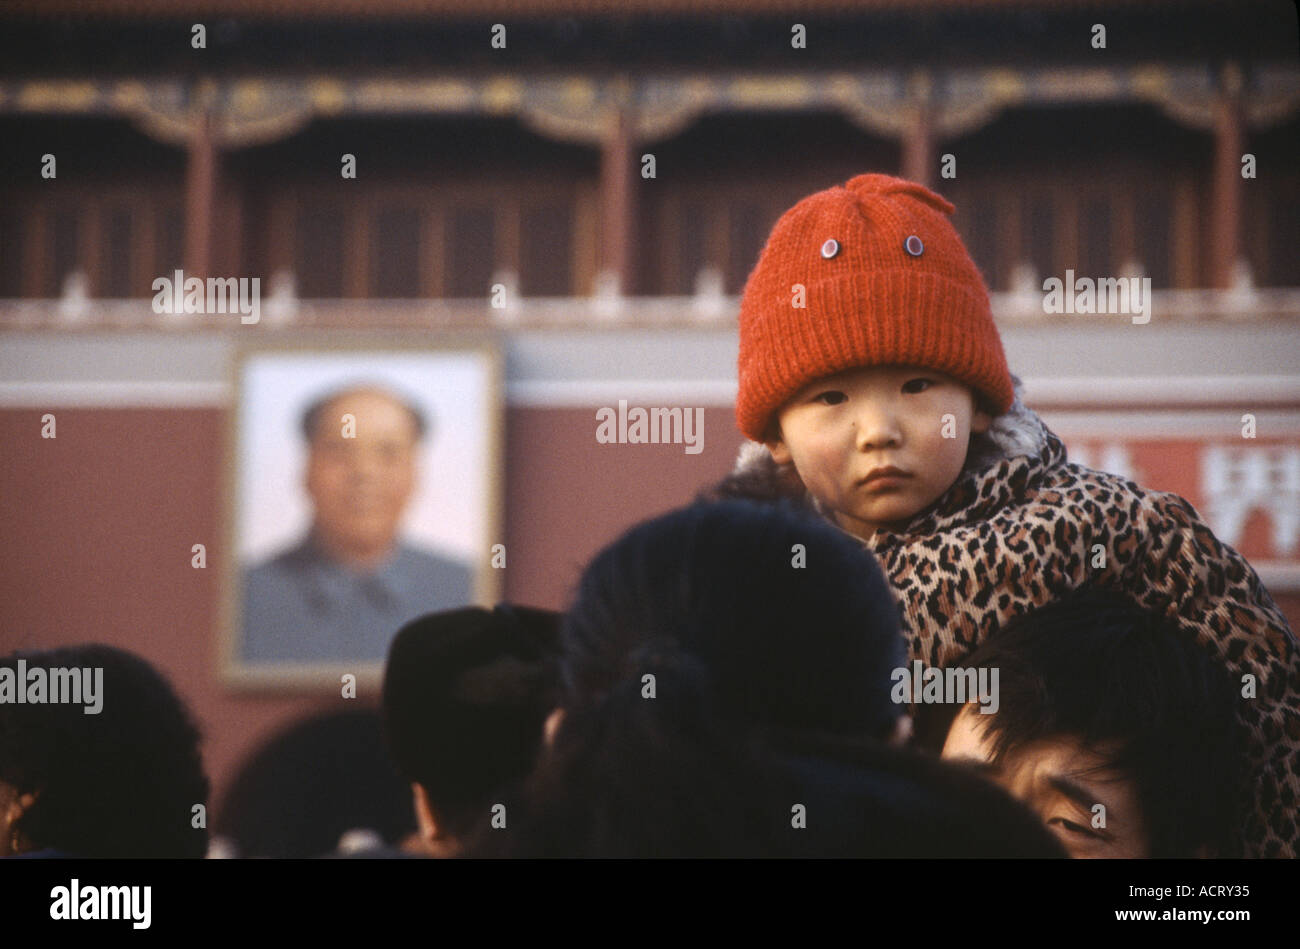 A kid in Tiananmen Square Beijing China Stock Photo